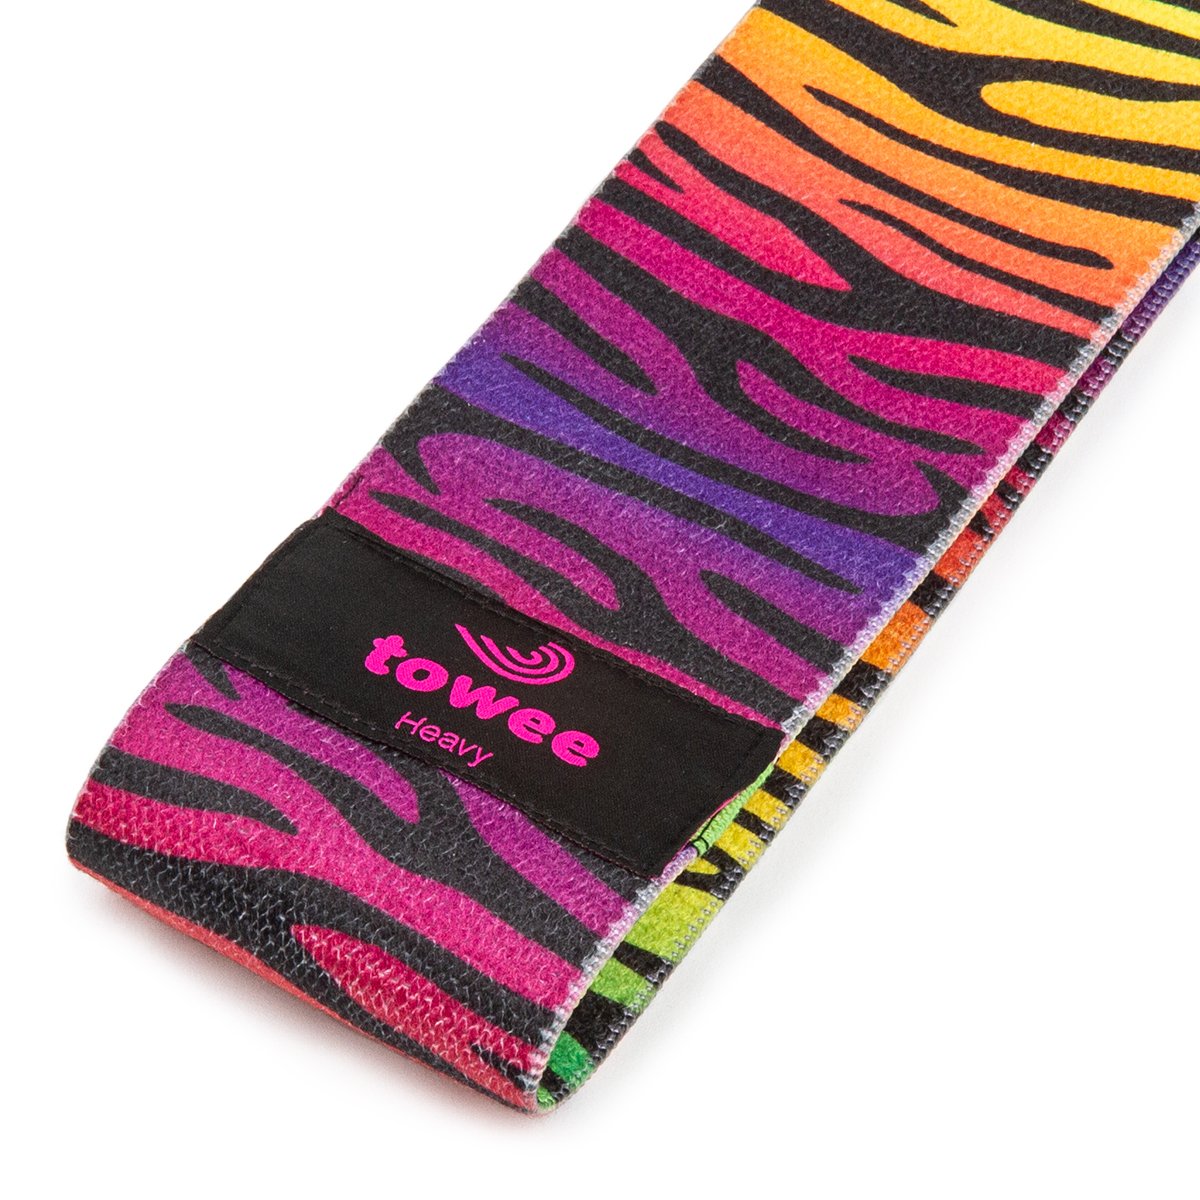 Tweee Booty Band Textile Resistance Rubber Zebra - Strong Resistance